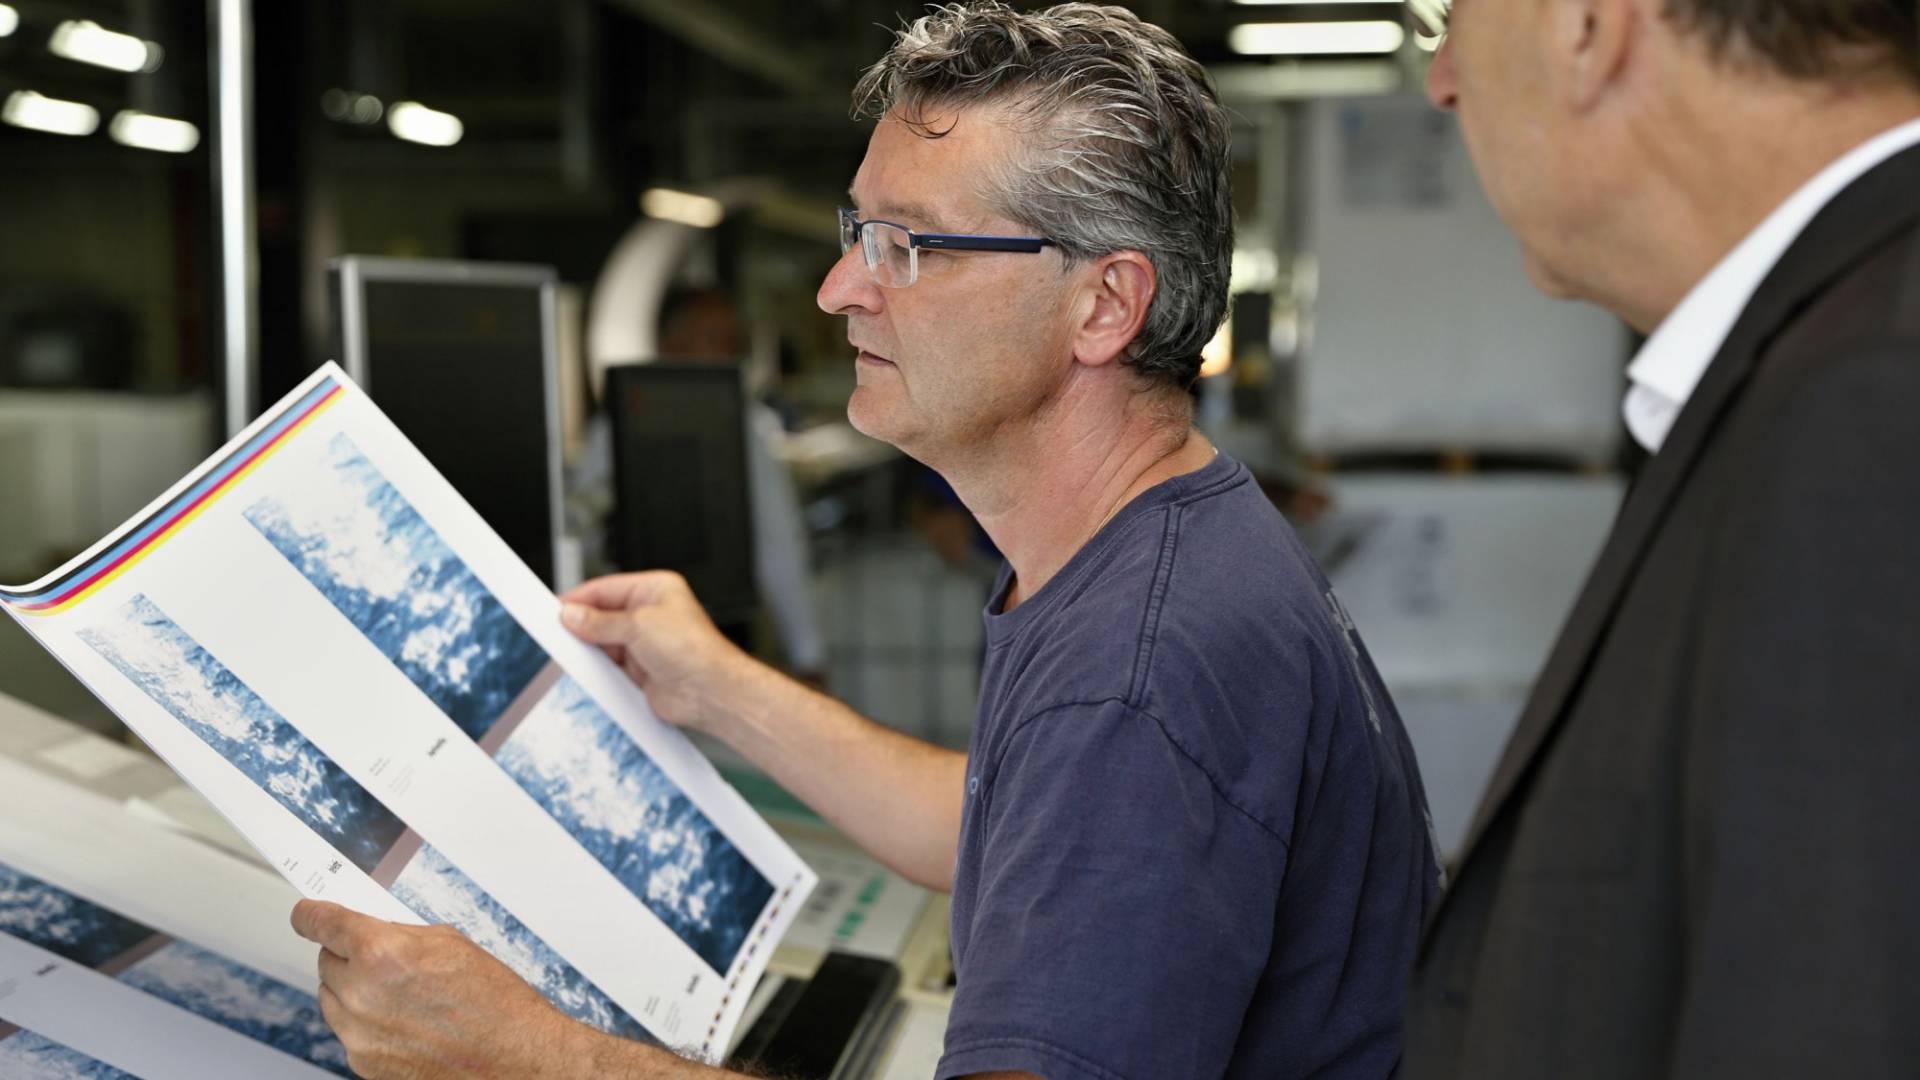 A man holds a printout of the artwork while another man looks over his shoulder.